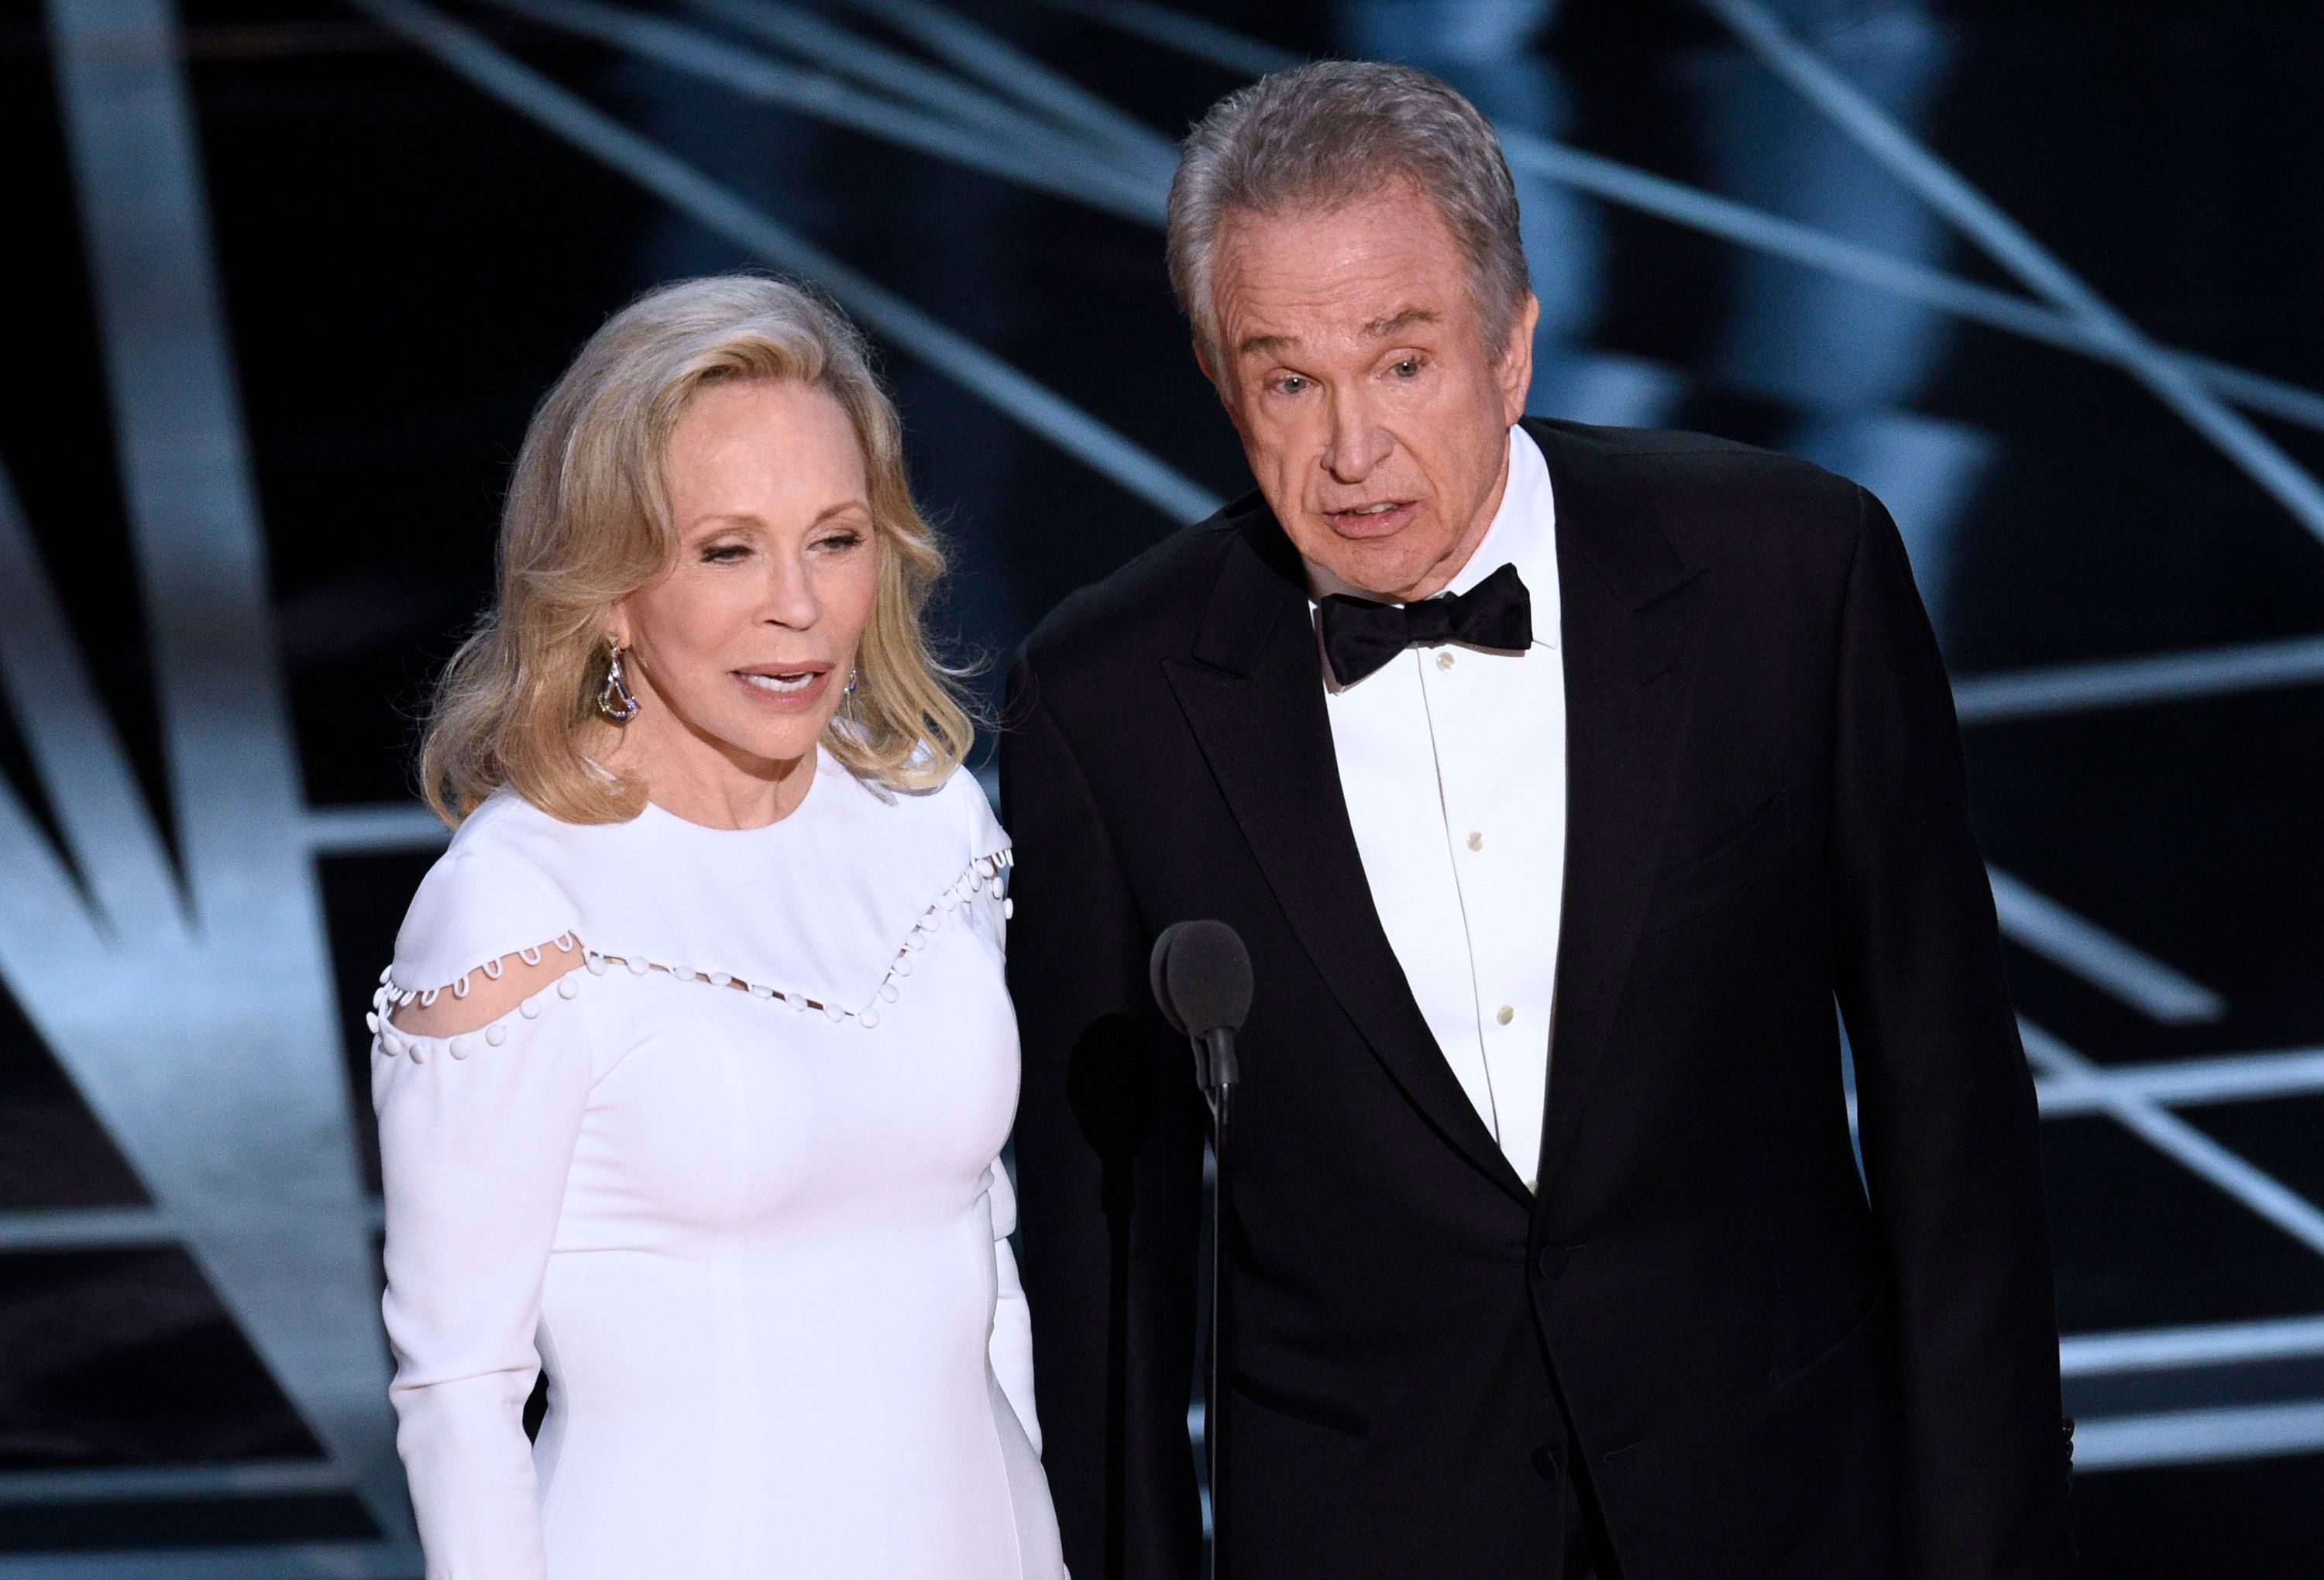 The 15 Most Memorable Academy Awards Moments From History